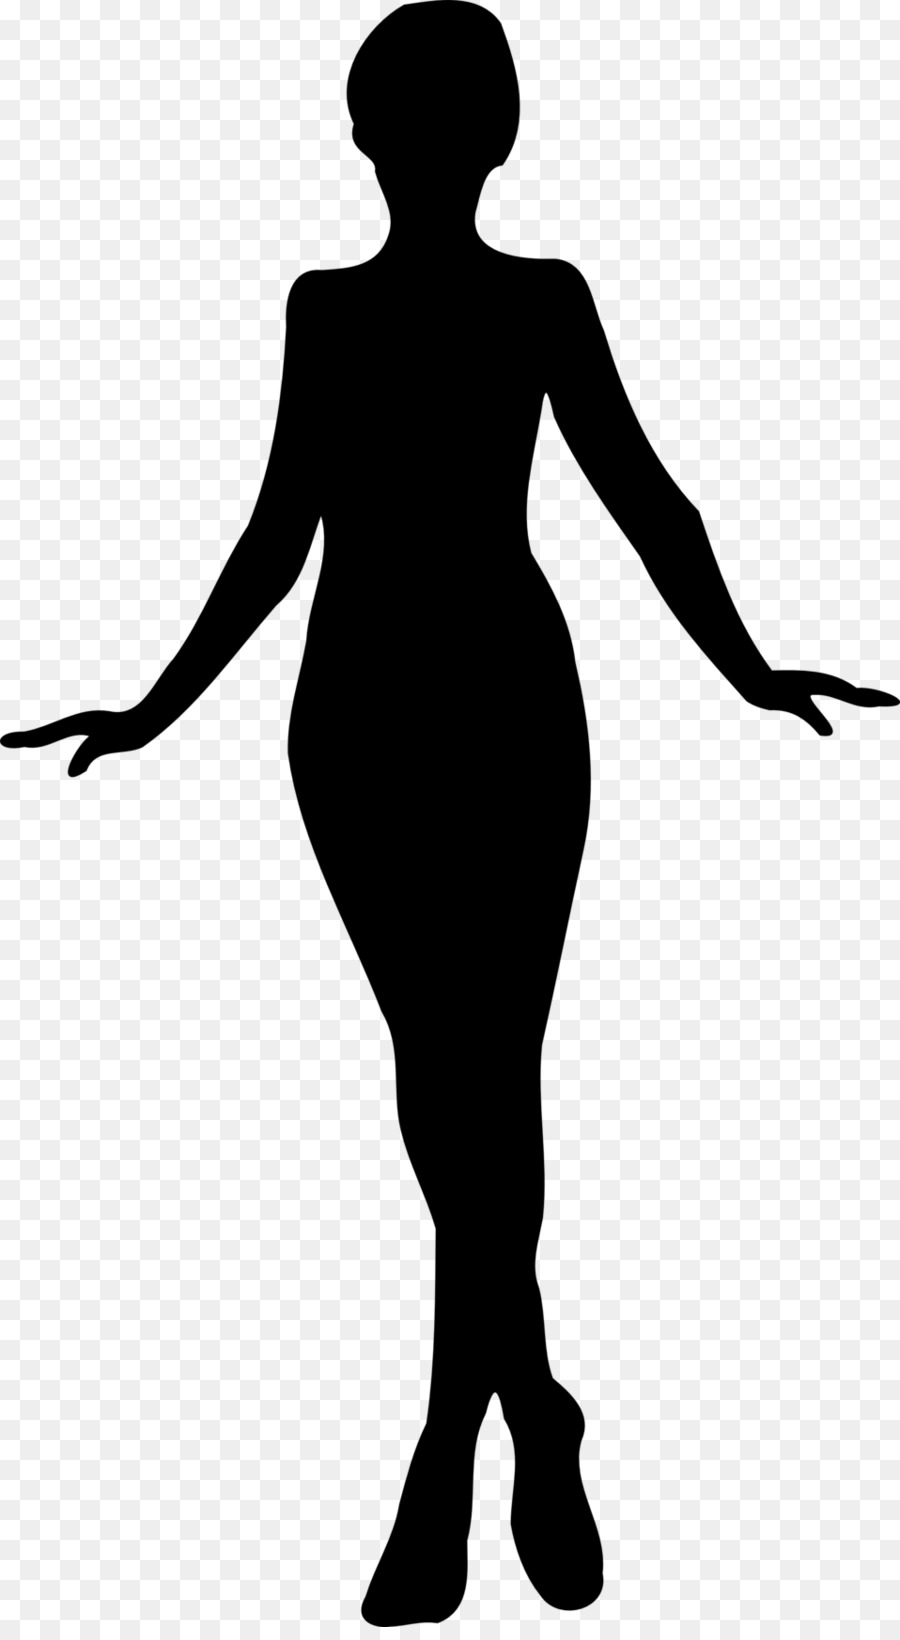 Strong black woman Clip art - Female Worker png download - 958*1732 - Free Transparent Woman png Download.